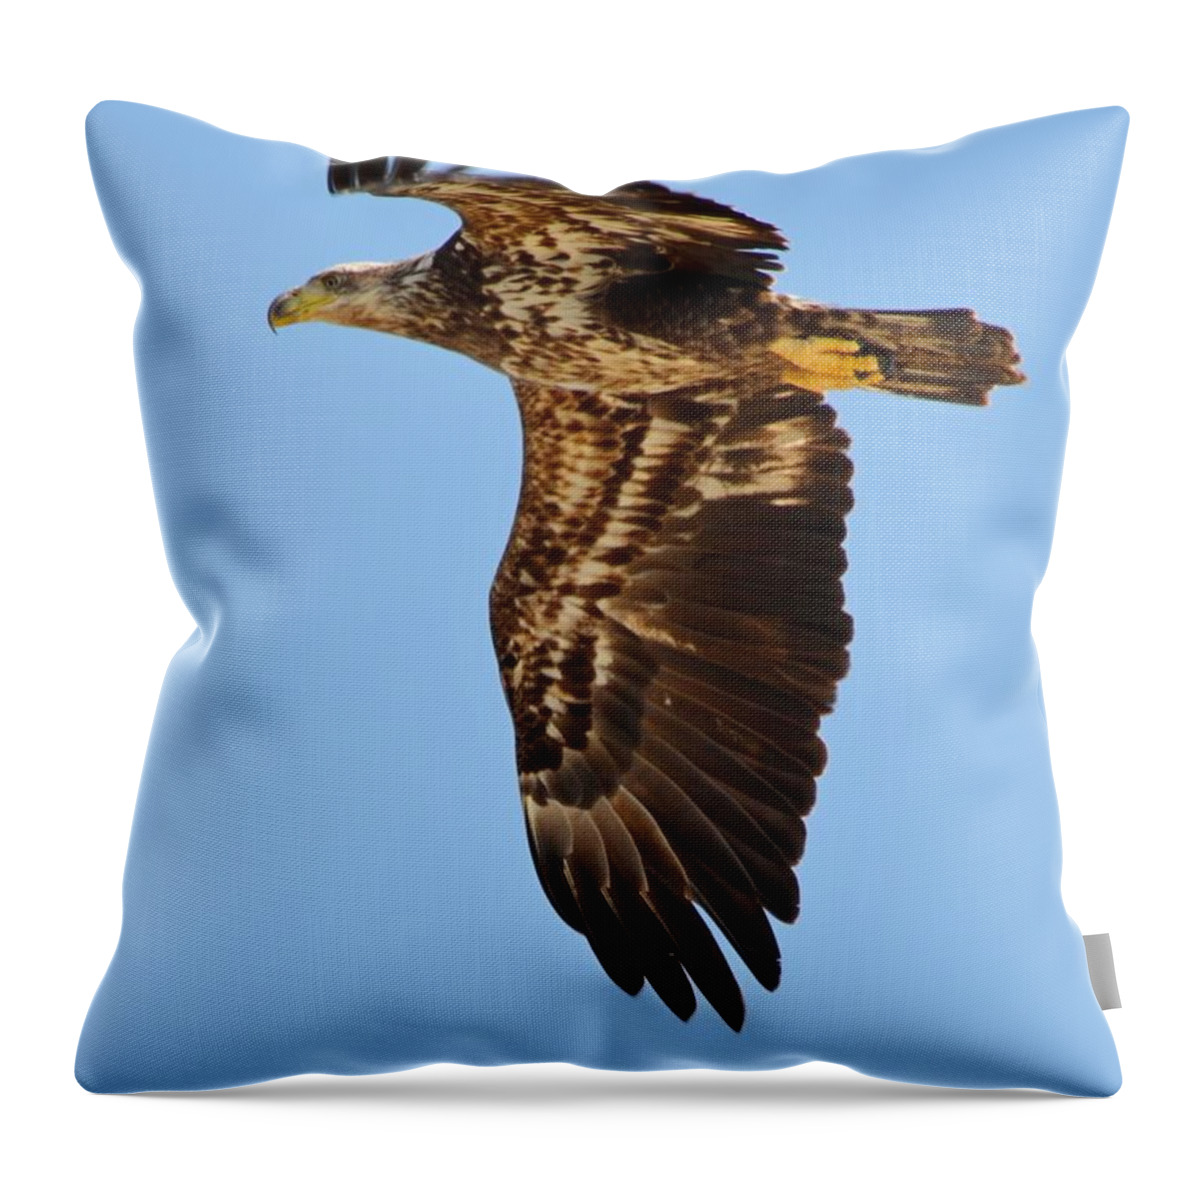 Juvenile Throw Pillow featuring the photograph Juvenile Bald Eagle Close Up In Flight by Jeff at JSJ Photography